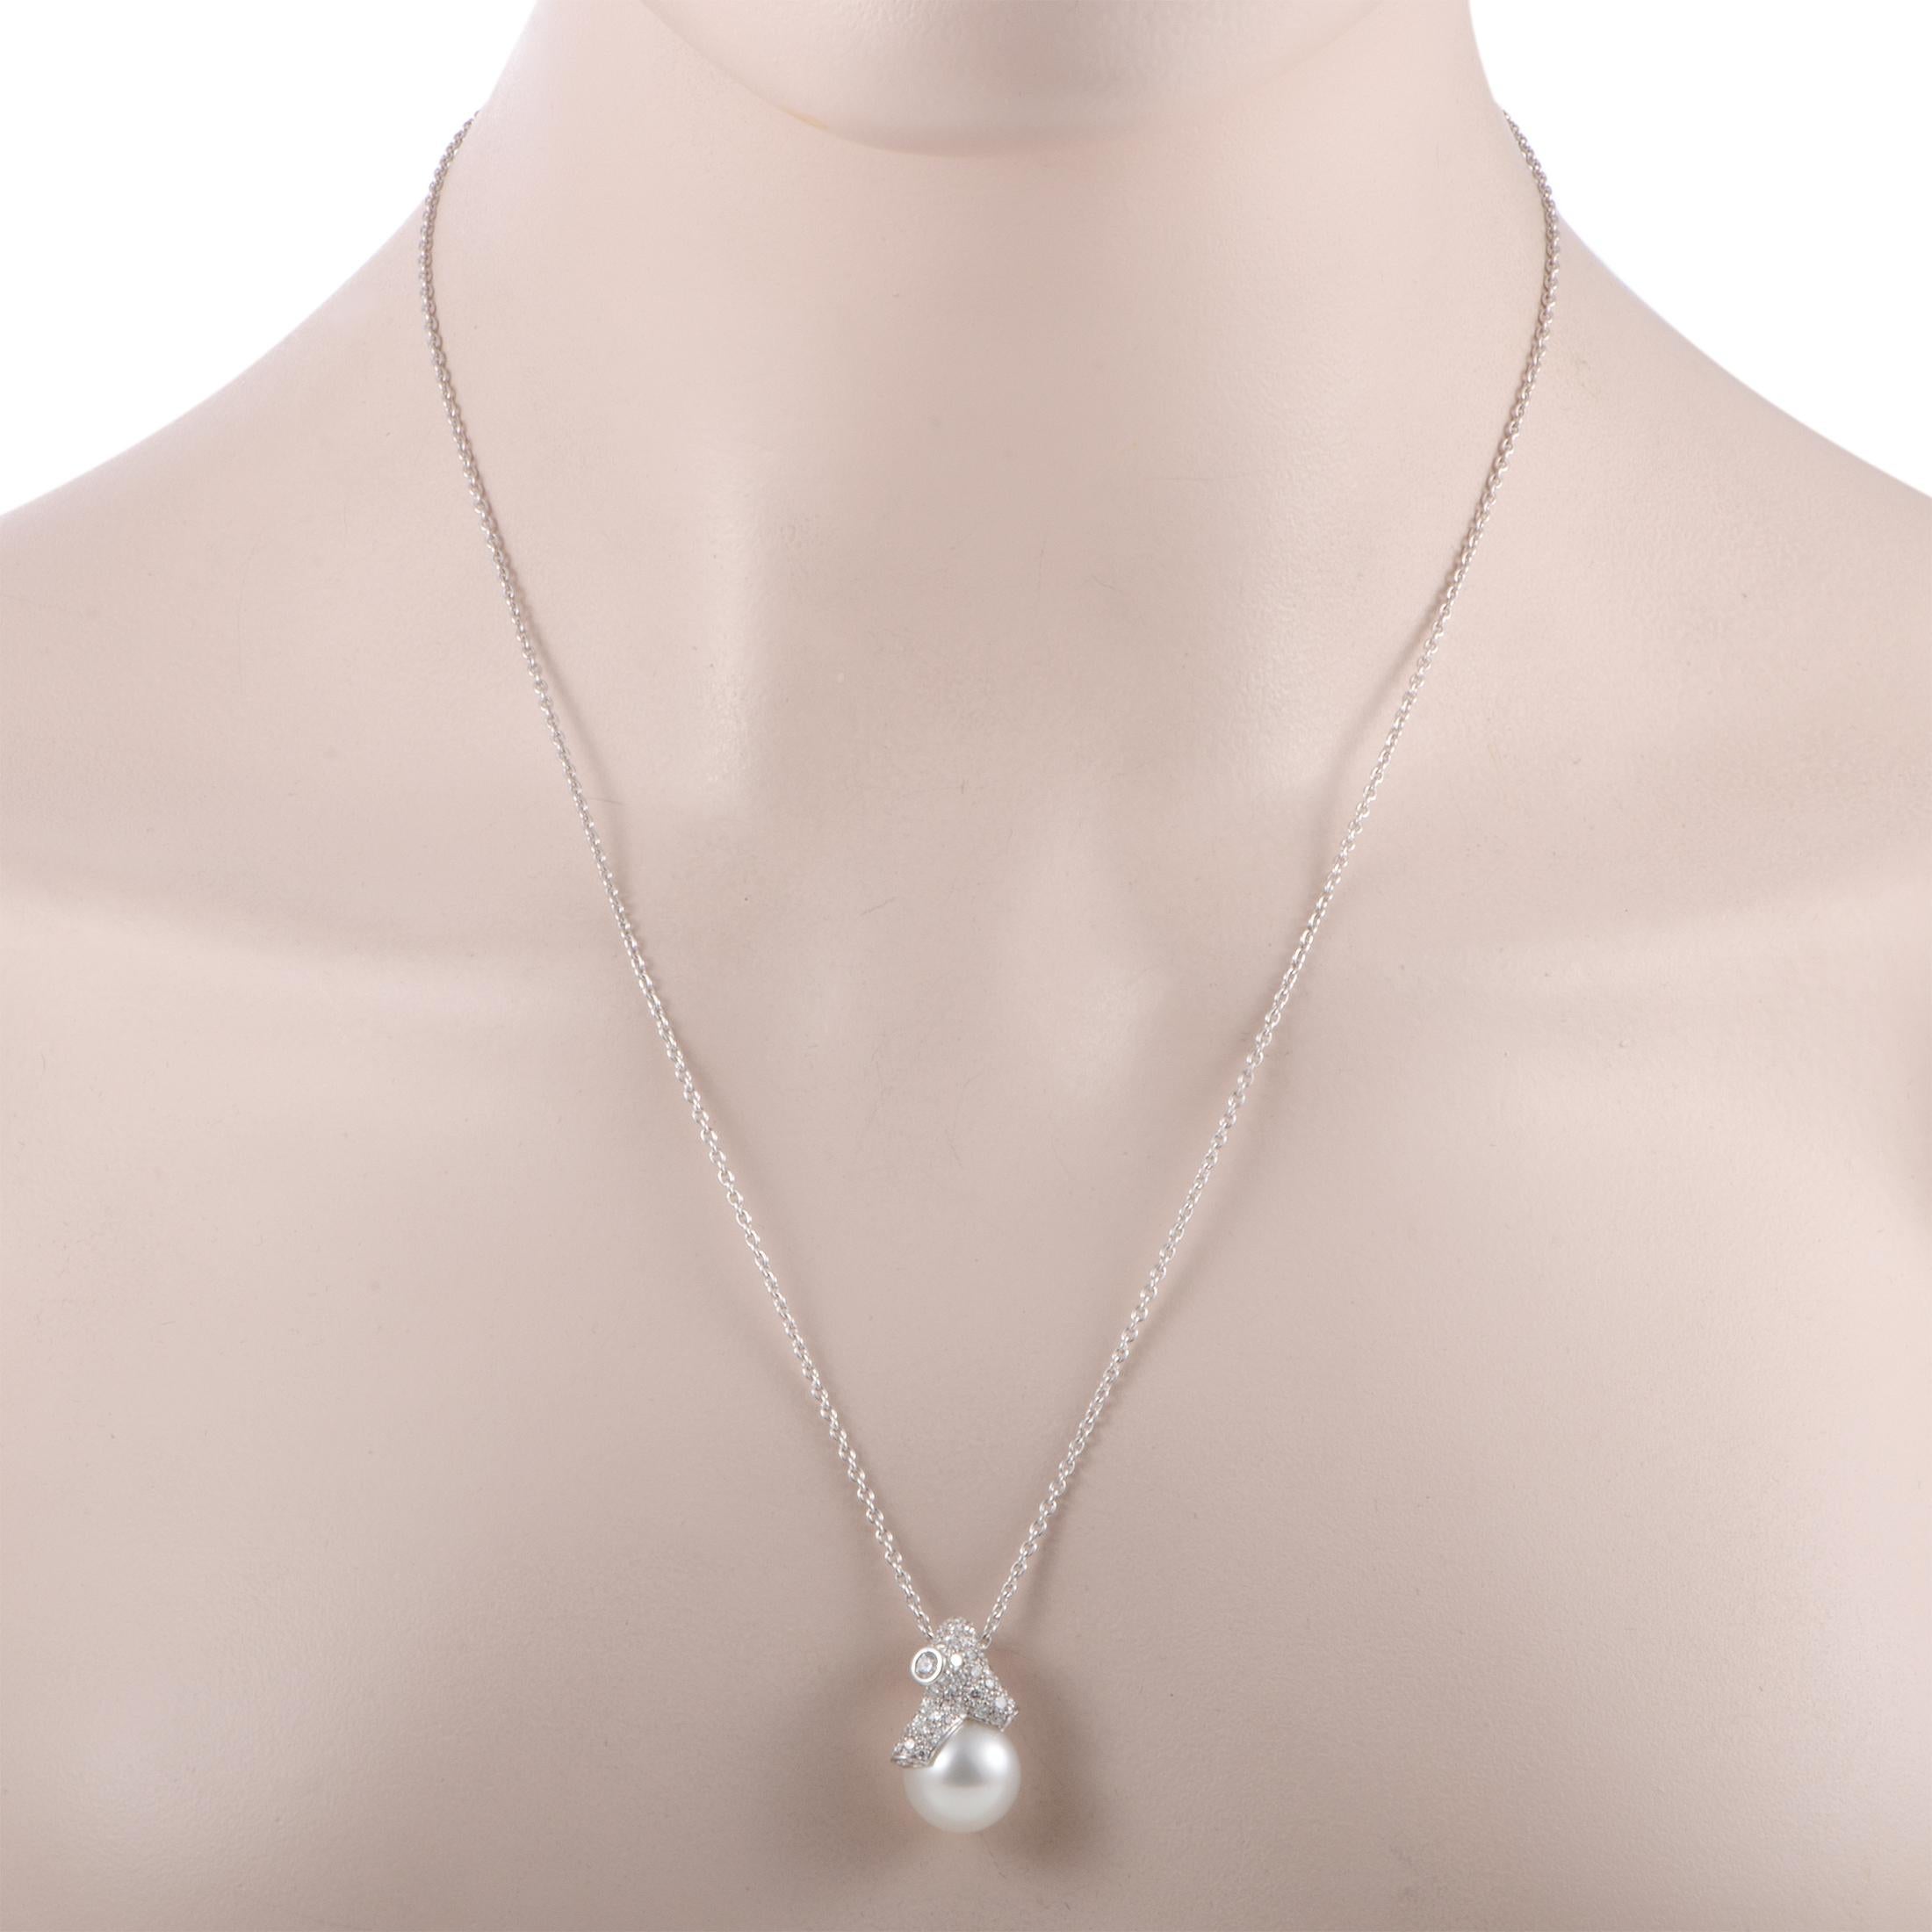 Embrace an incredibly compelling look of absolute femininity with this sublime necklace that will accentuate your ensemble in an exceptionally charming manner. Featuring a beautifully designed chain onto which a dainty pendant is attached, this